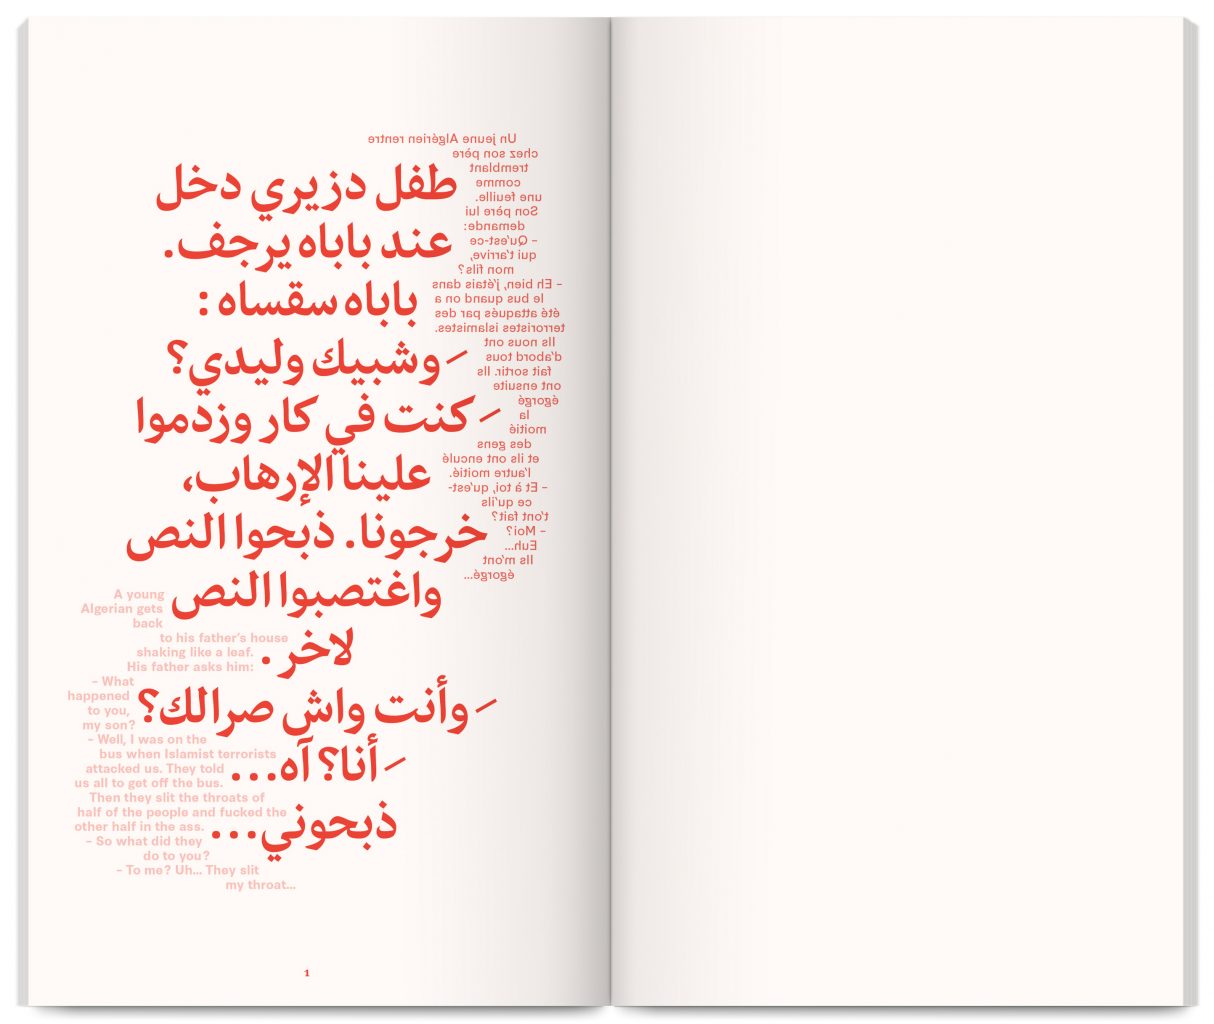 A Personal Collection of Jokes, artist book by Zineb Sedira, trilingual Algerian arabic, English, French, design by In the shade of a tree studio, founded by Sophie Demay and Maël Fournier Comte.